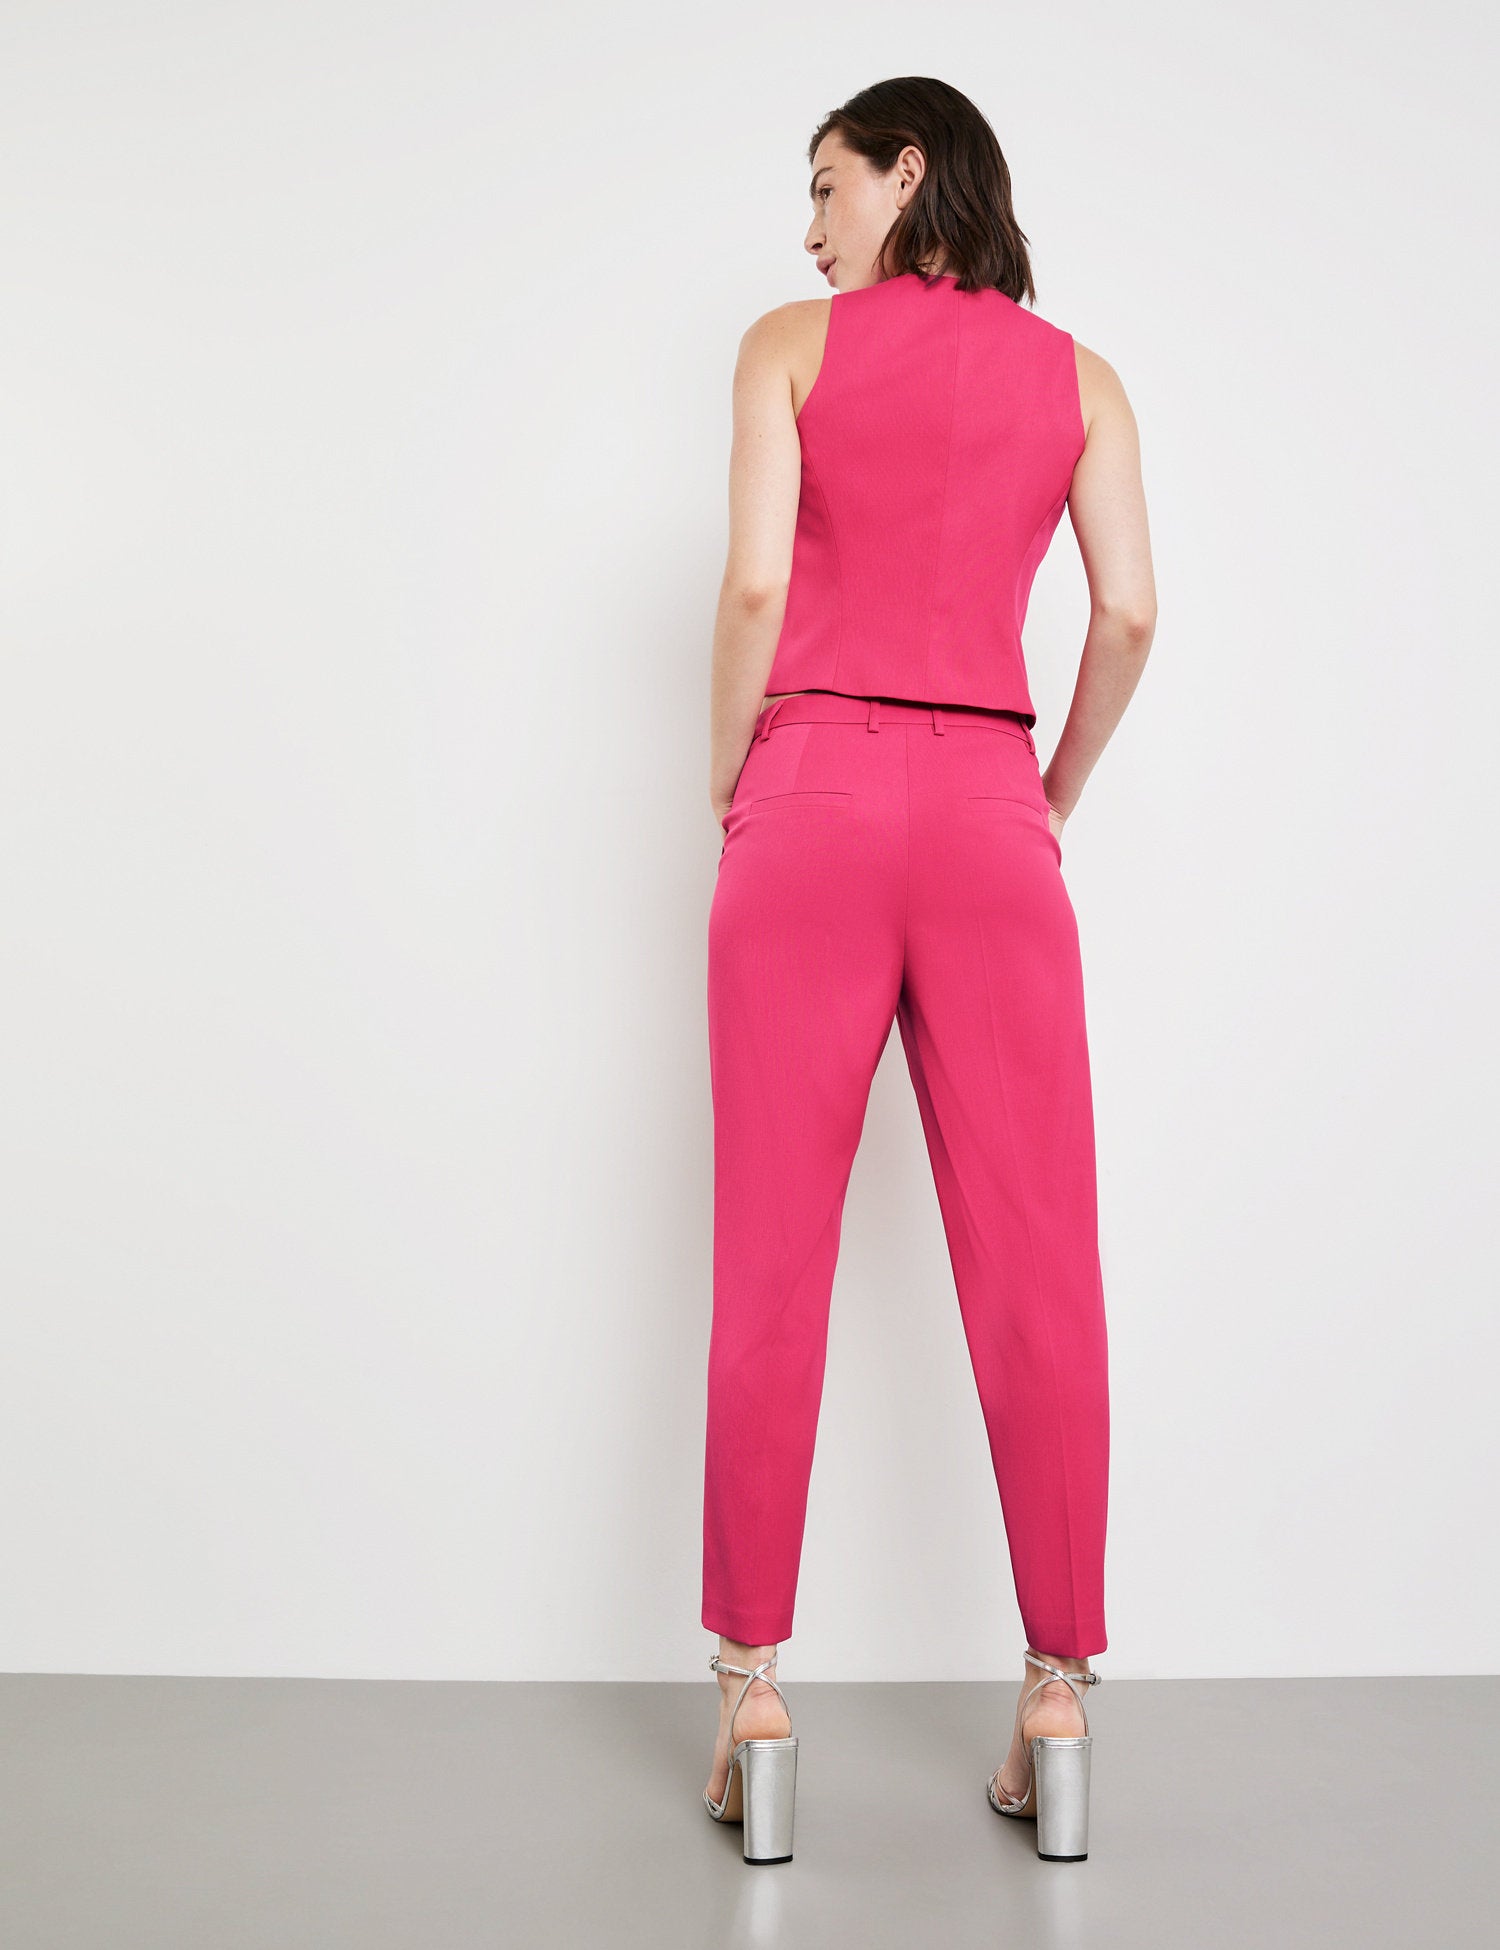 Fine 7/8 Length Trousers In A Slim Fit_420413-11254_3400_06